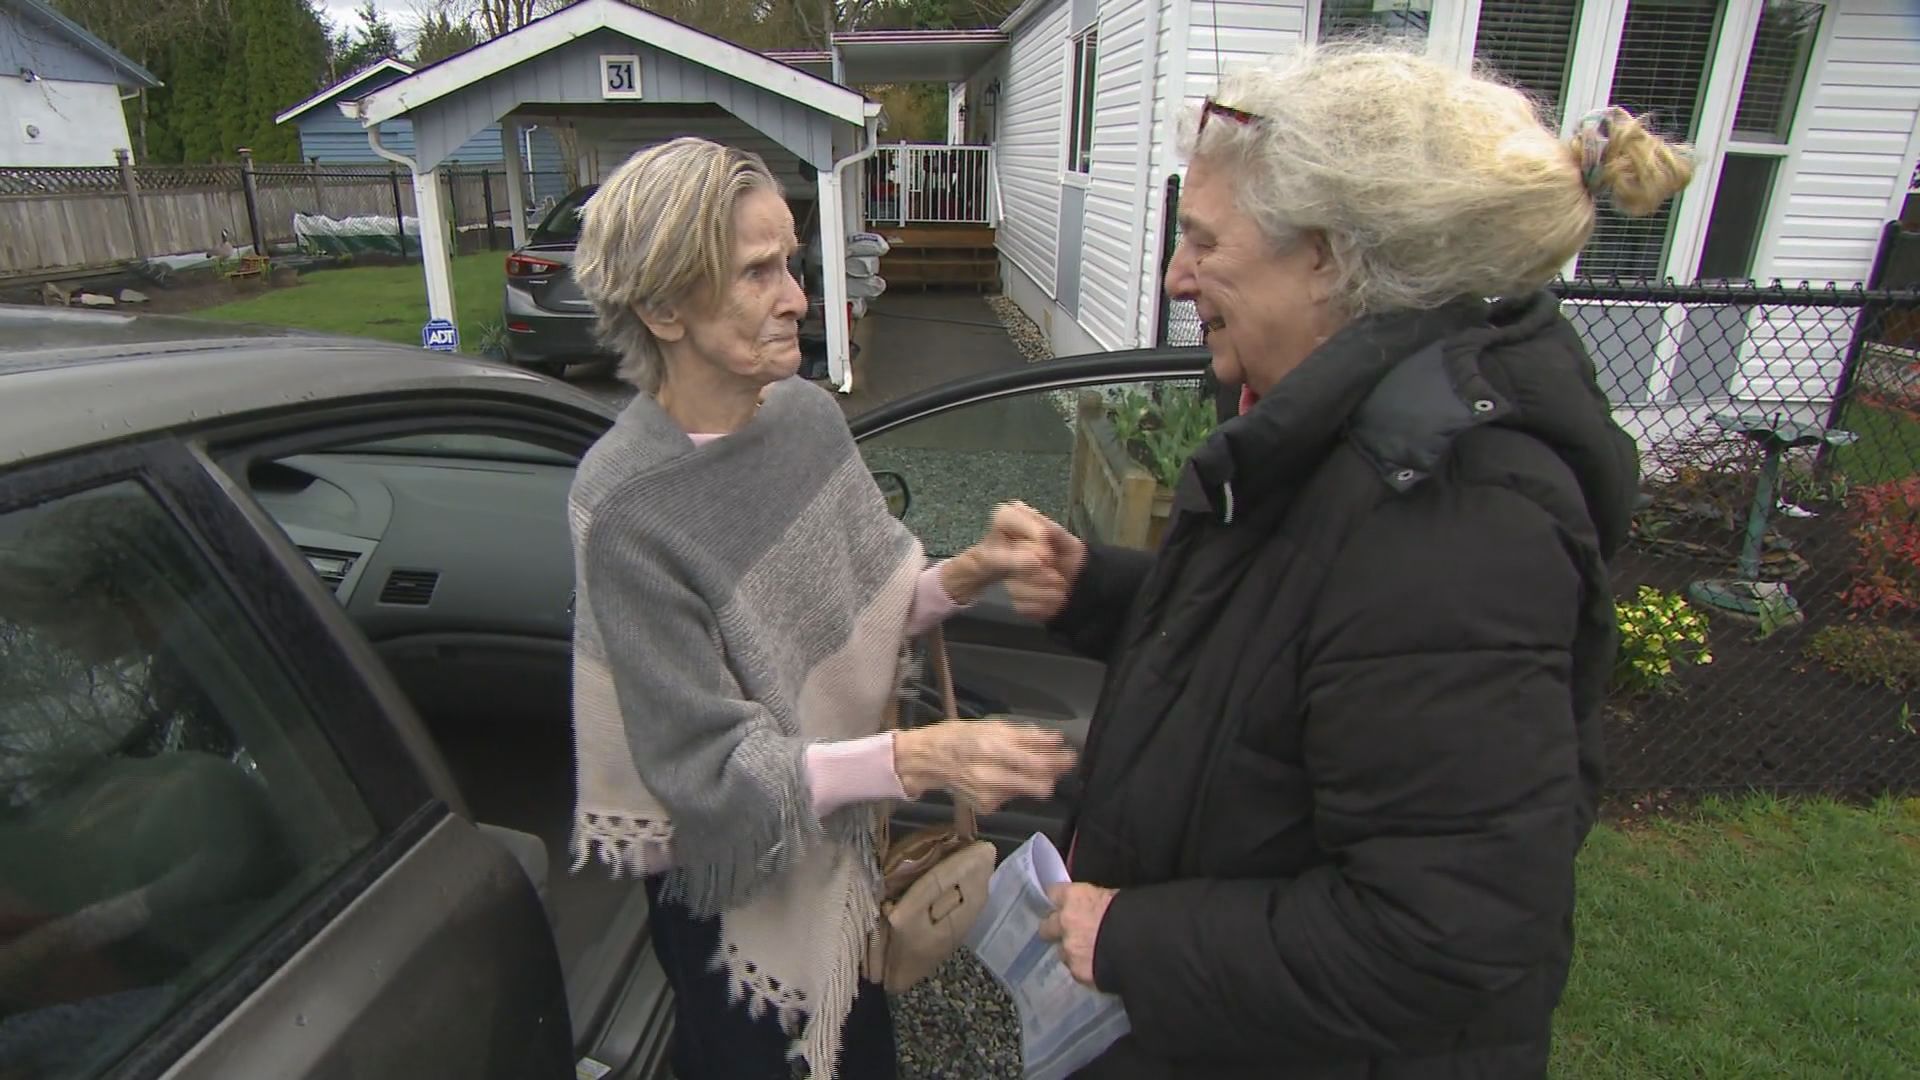 ‘Glad to help’: B.C. couple gift vulnerable senior a car after seeing her story